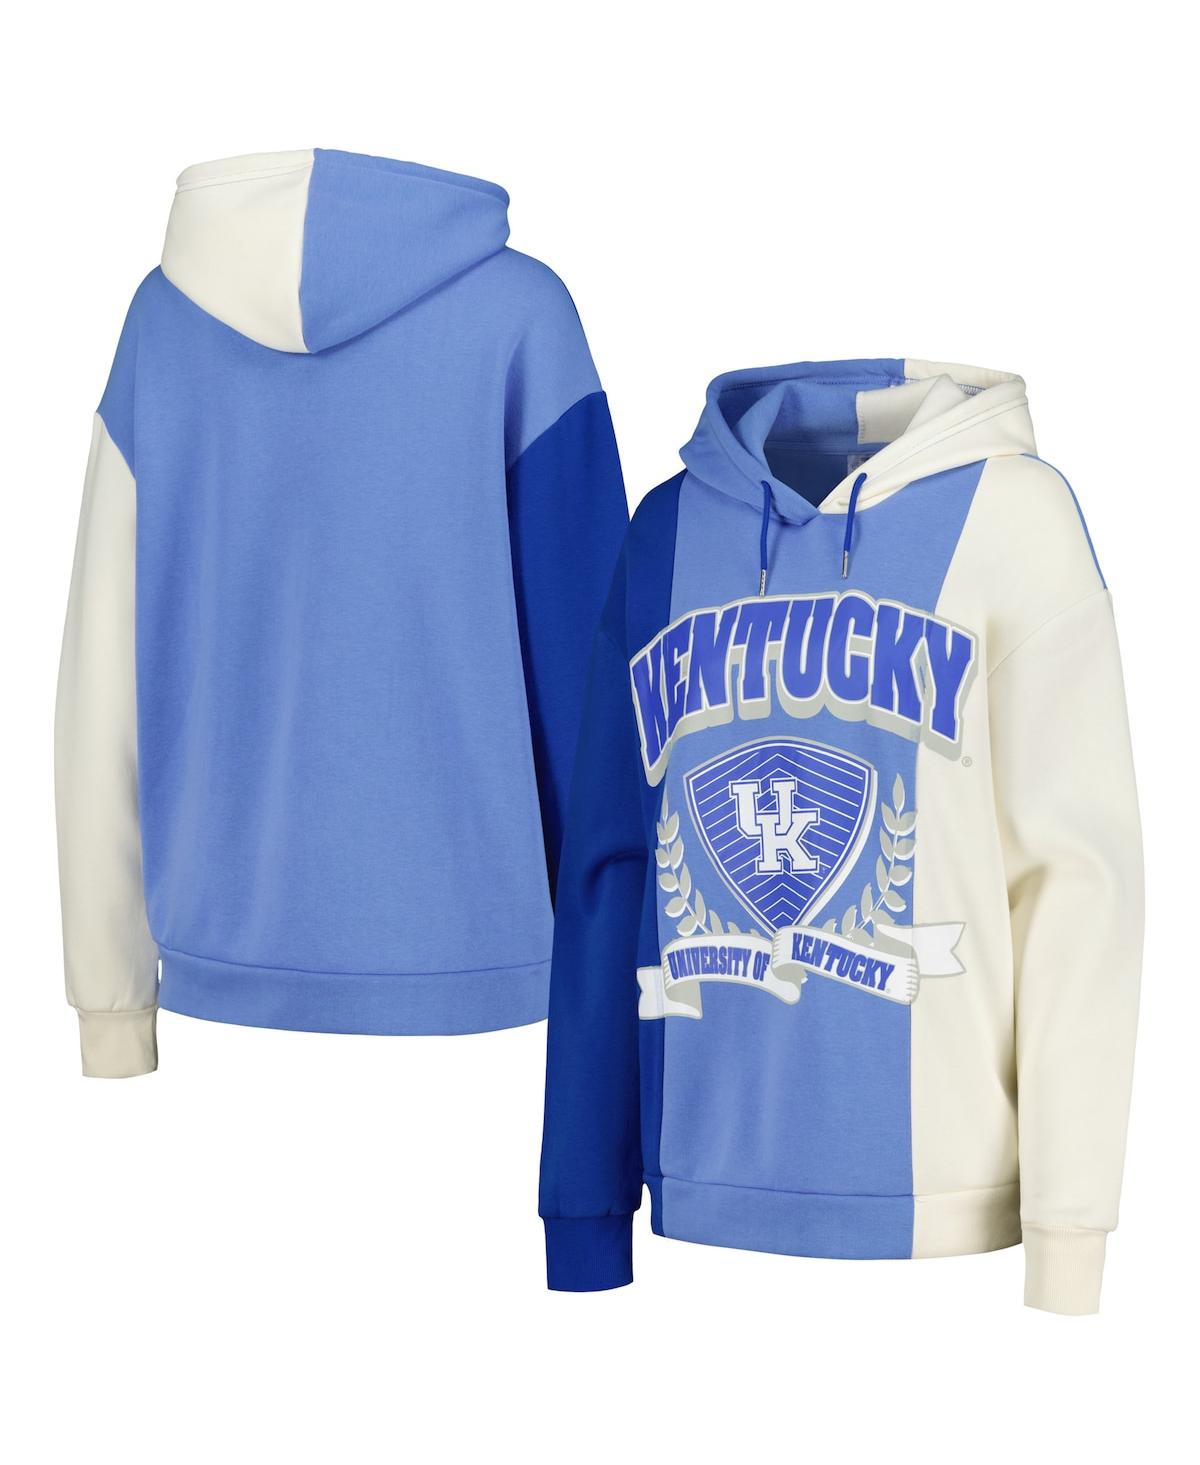 Women's Gameday Couture Royal Kentucky Wildcats Hall of Fame Colorblock Pullover Hoodie - Royal